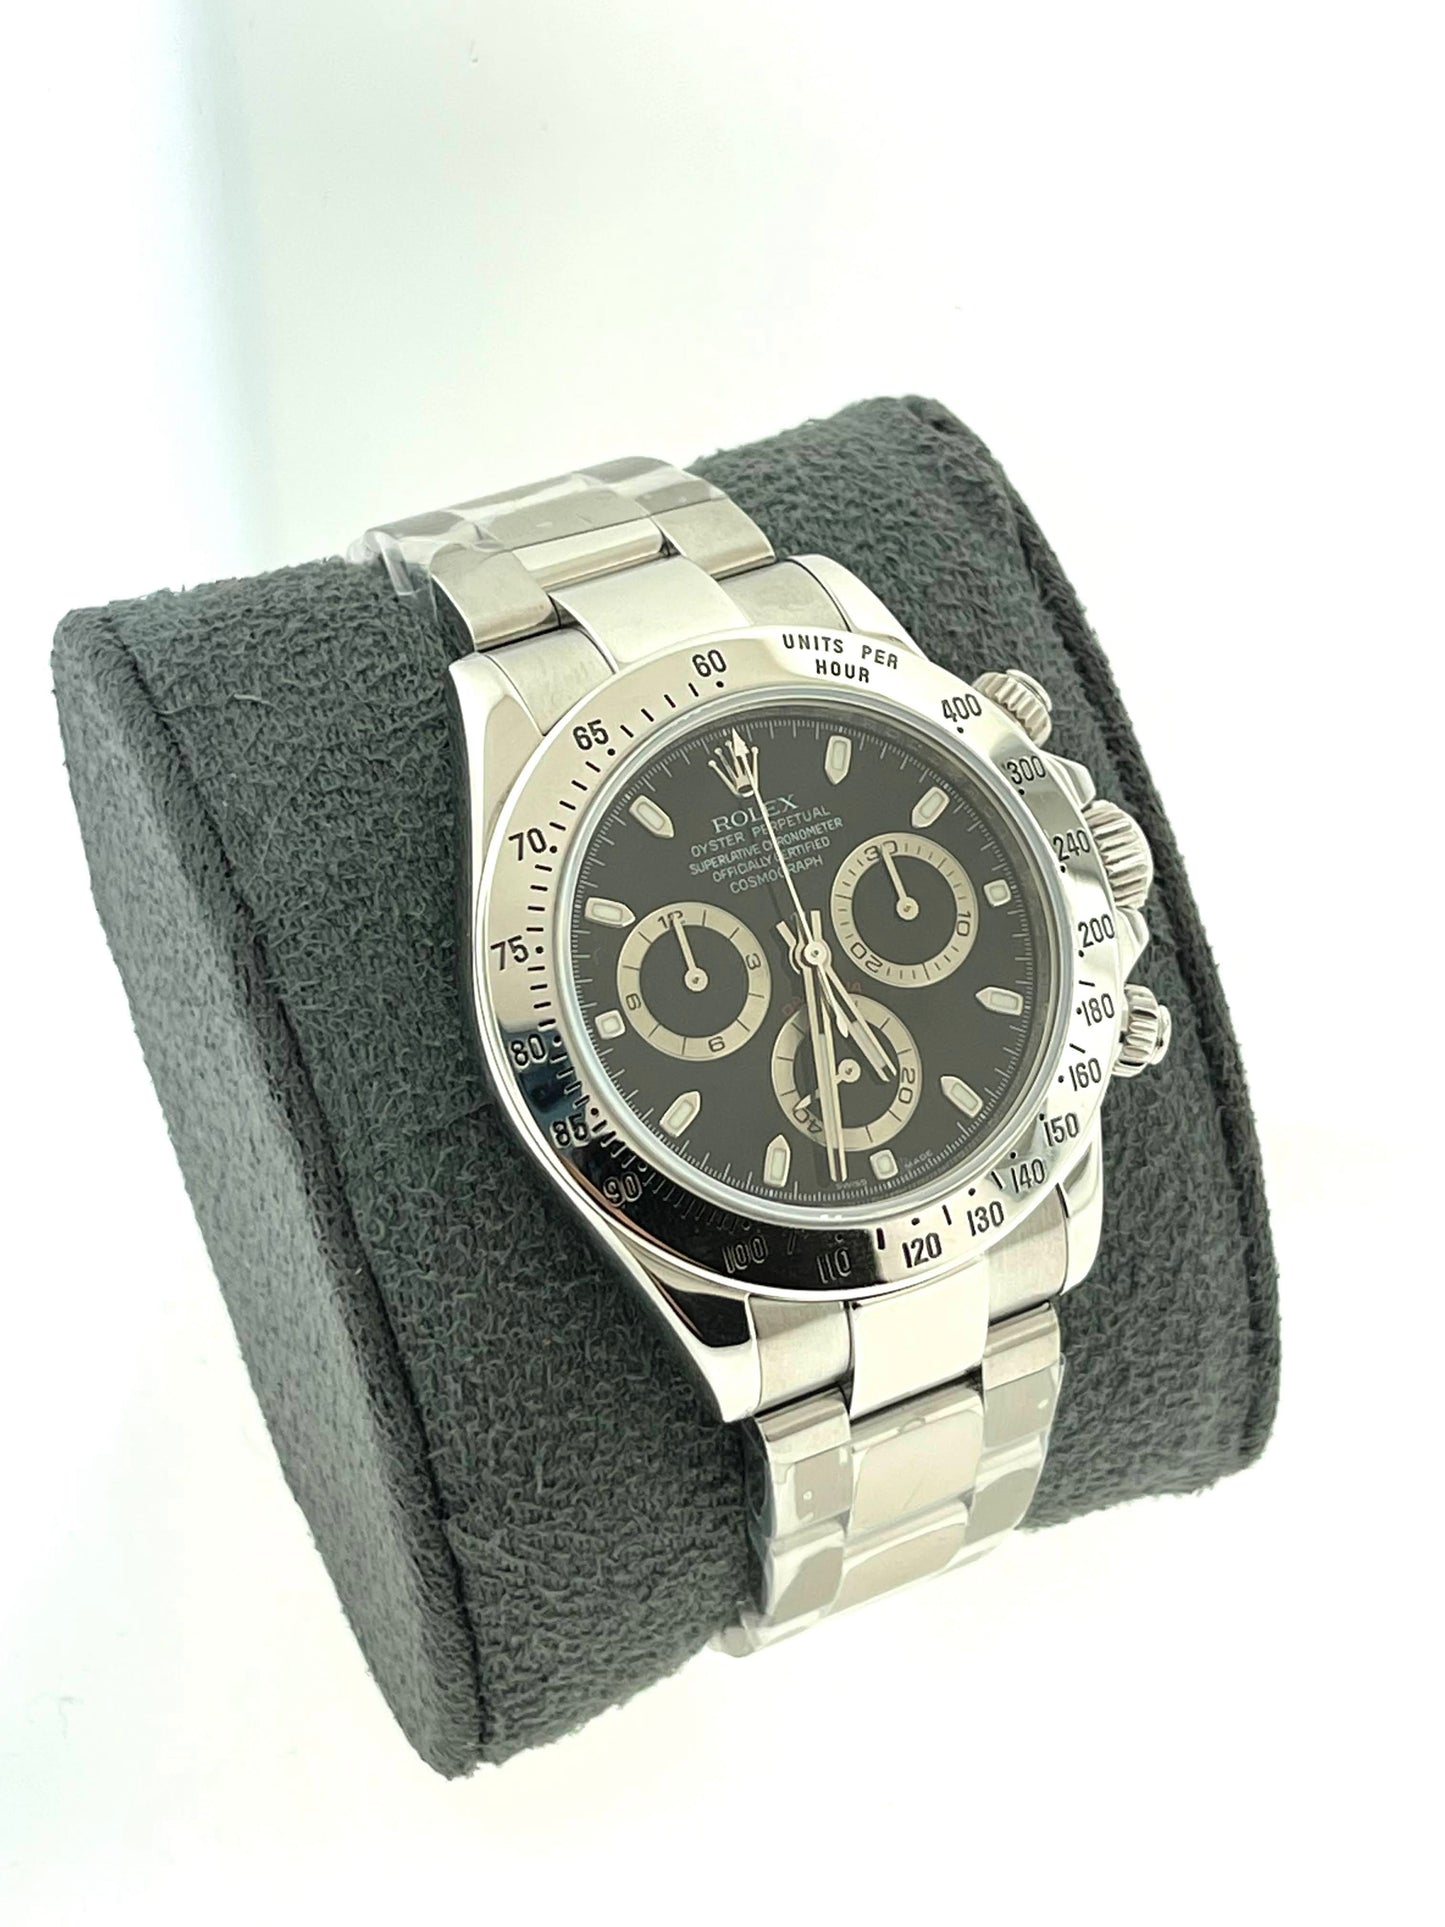 2007 Rolex Daytona Cosmograph 116520 Black Dial Stainless Steel No Papers 40mm